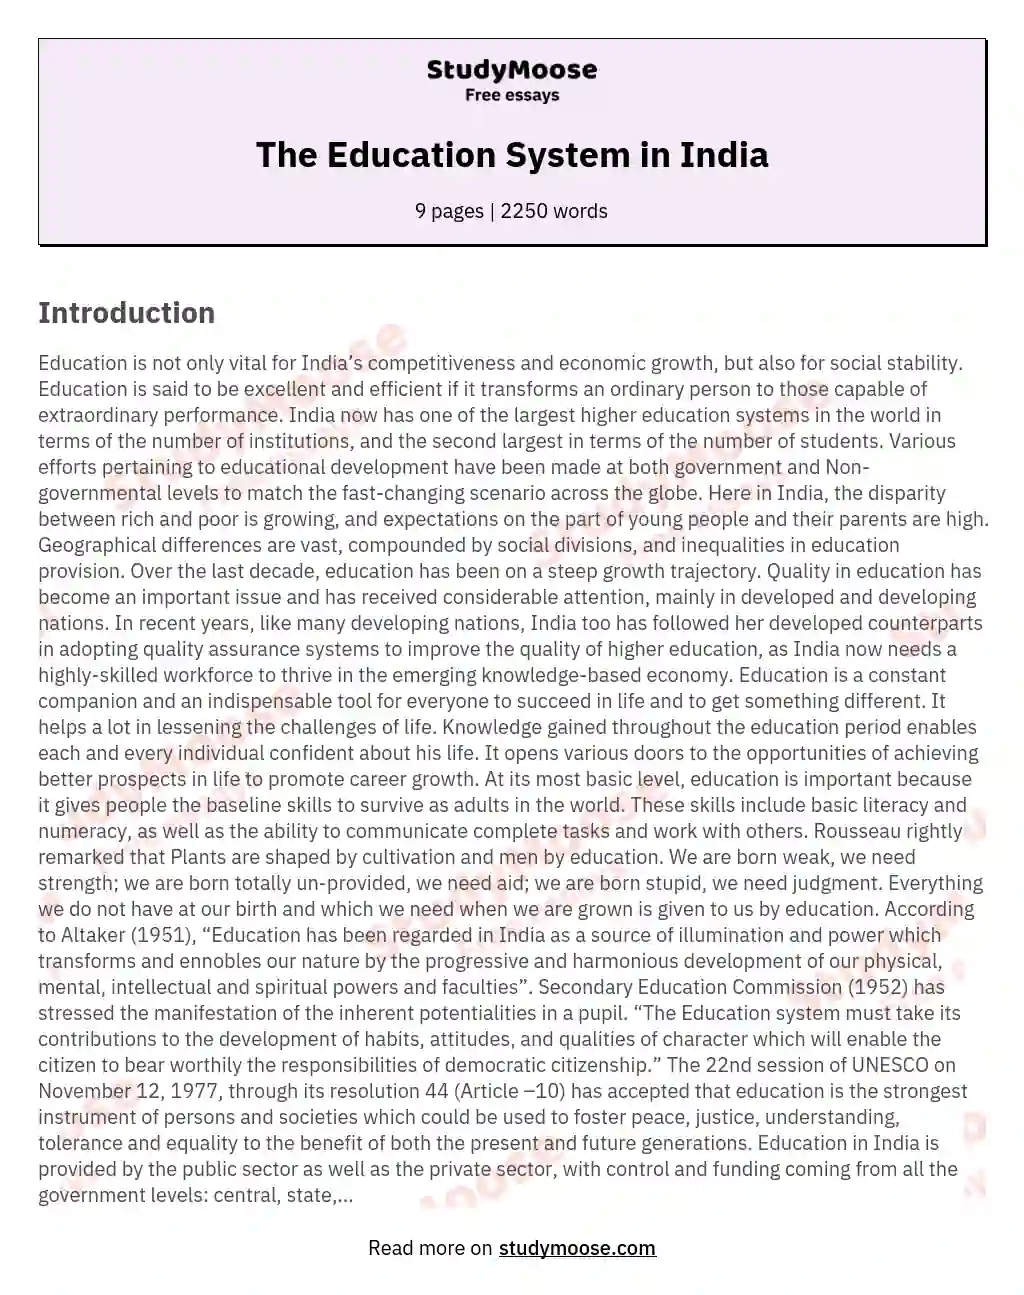 indian education system essay 500 words